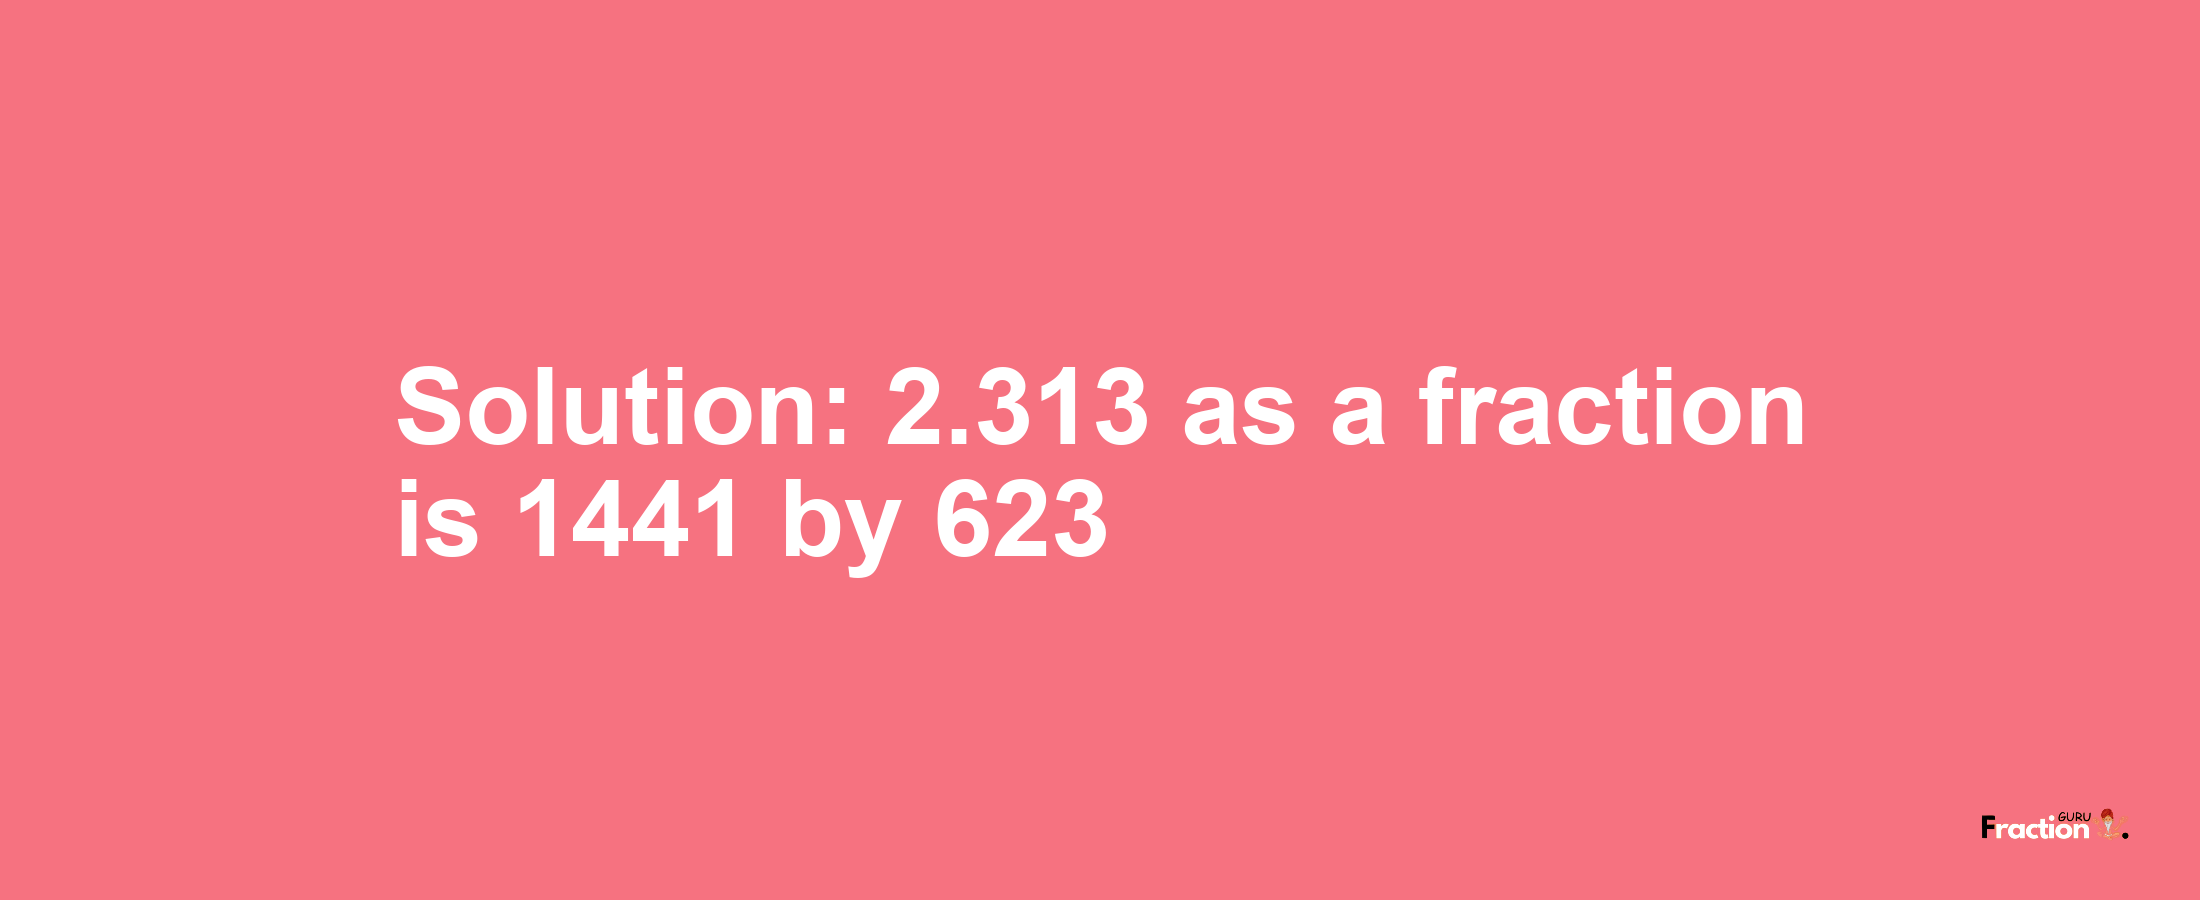 Solution:2.313 as a fraction is 1441/623